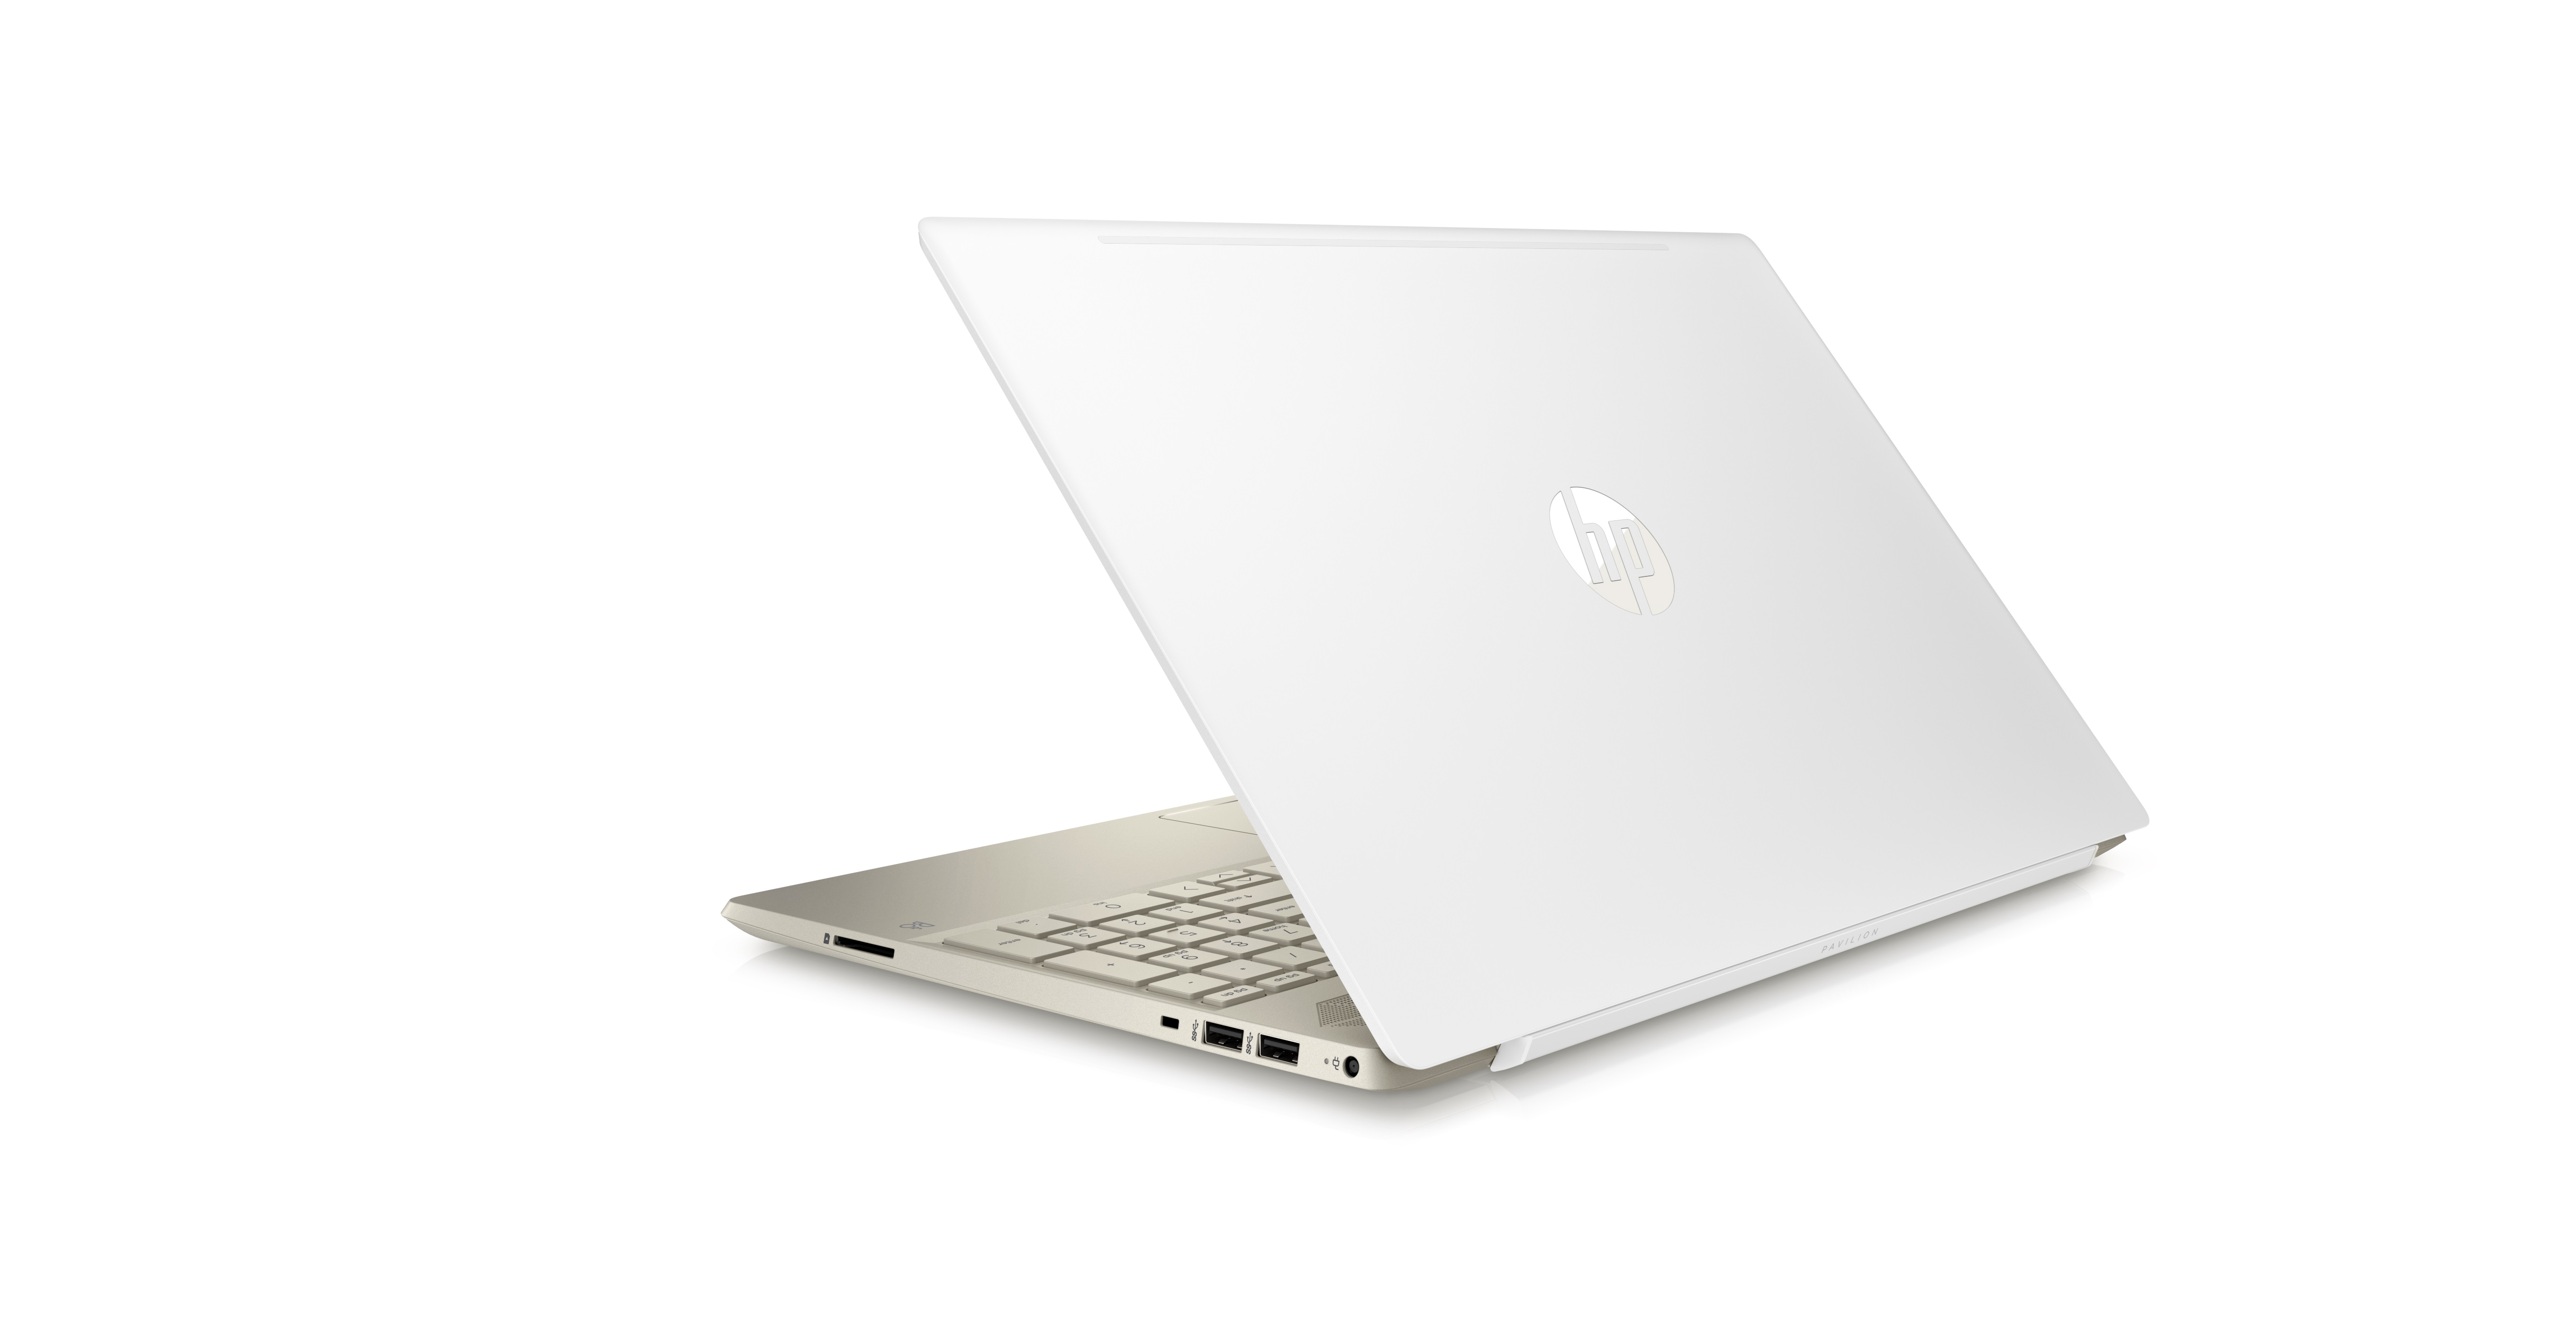 HP's new Windows 10 devices include convertibles, notebooks